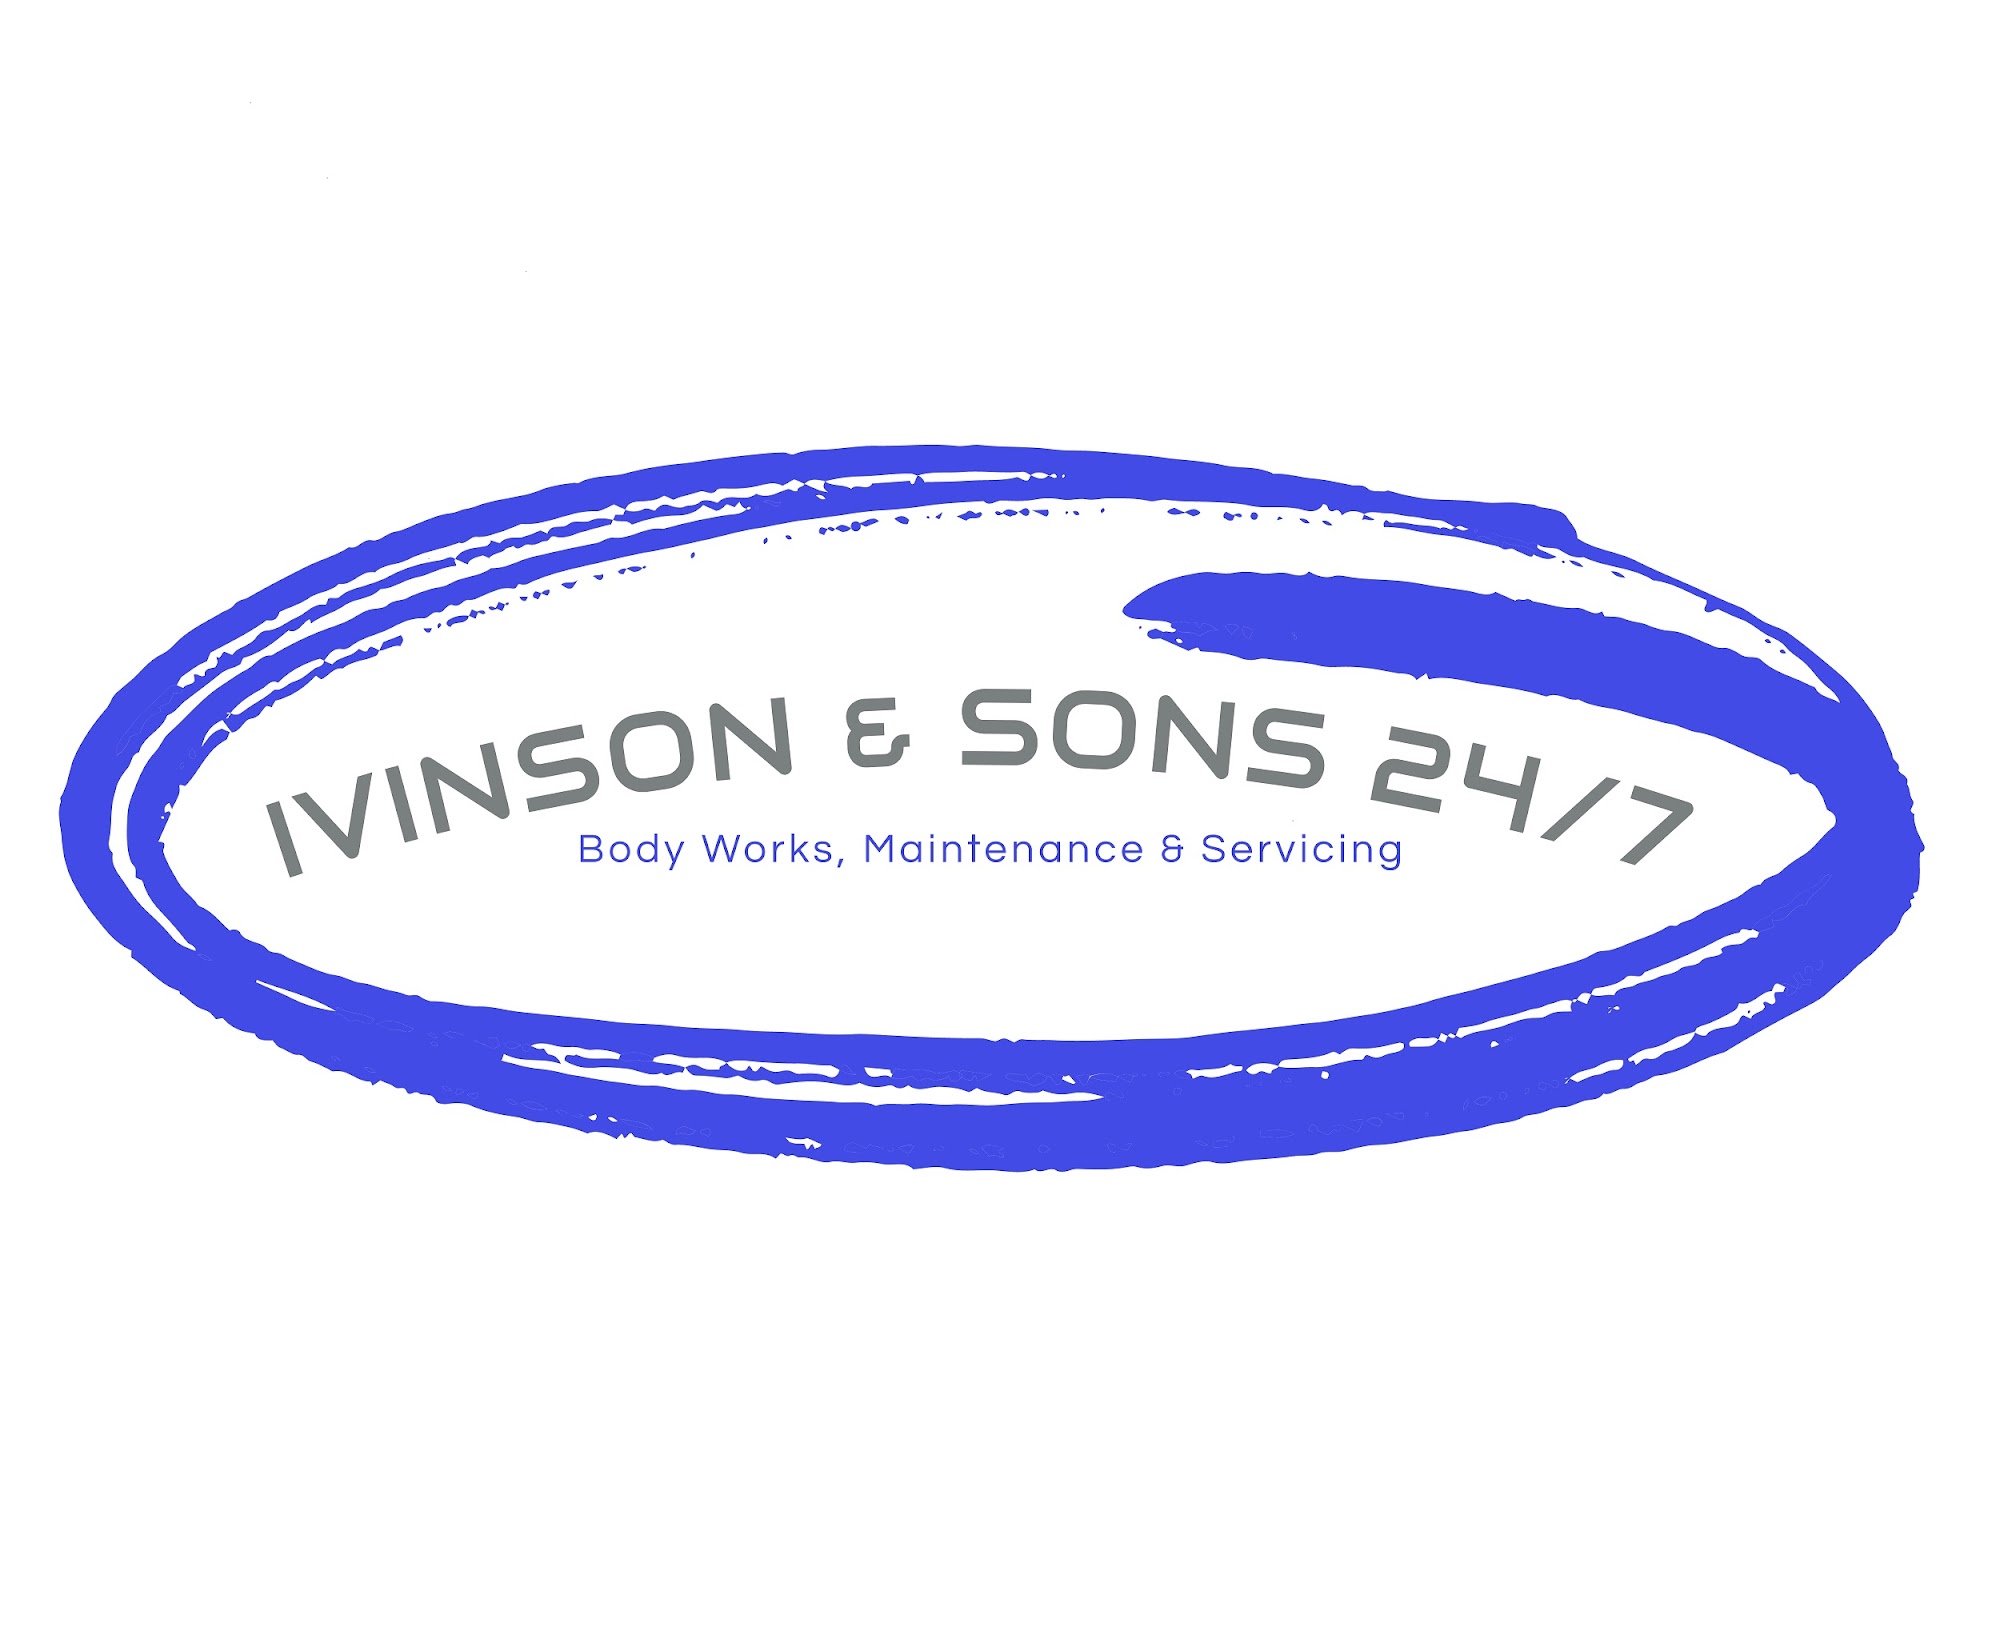 Ivinson & Sons 24/7 Limited